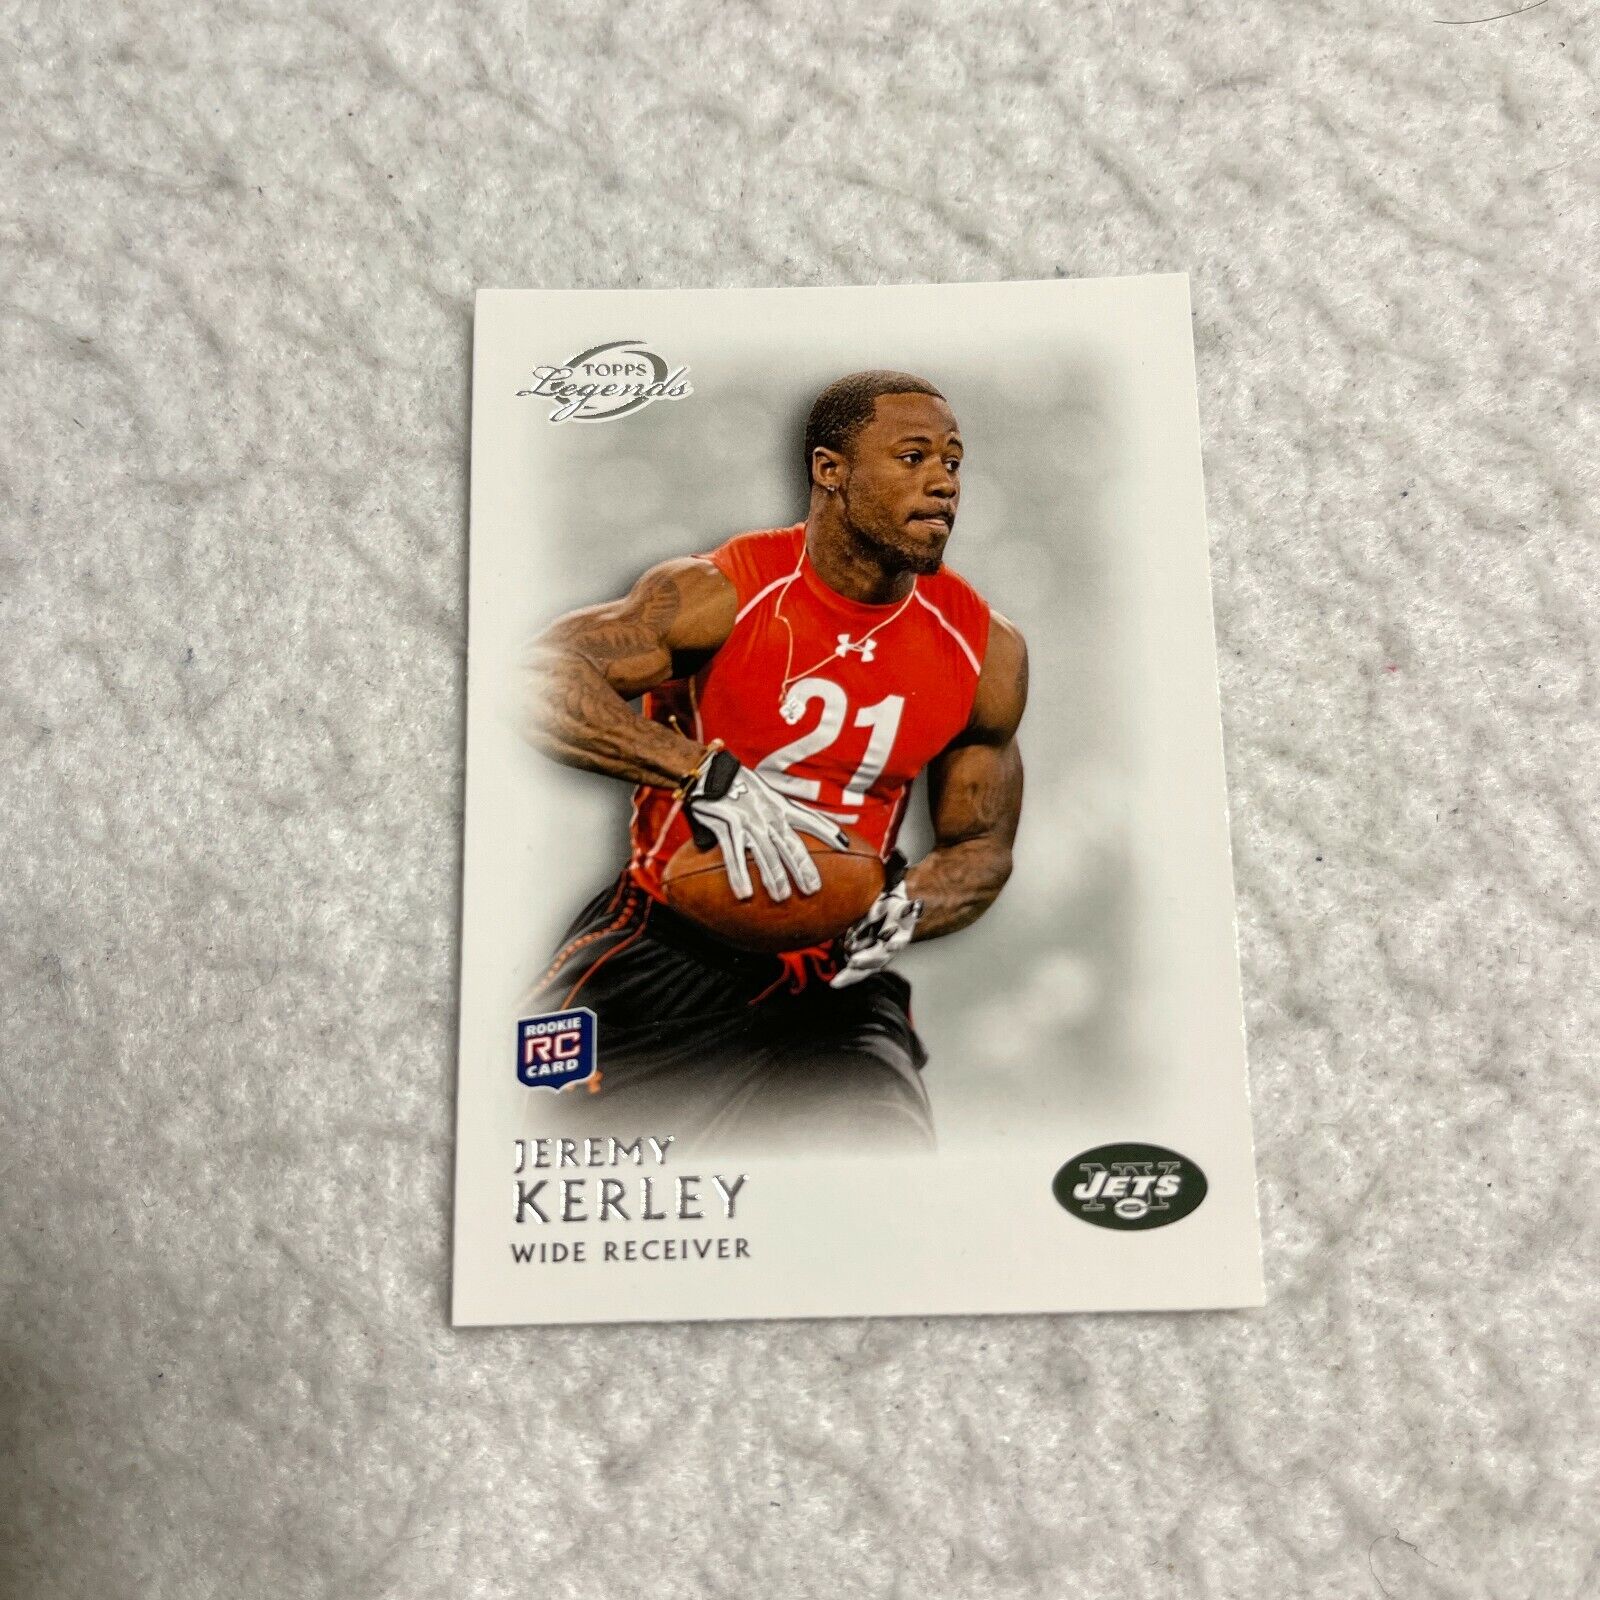 2011 Topps Legends NFL Football Card Jeremy Kerley Rookie RC Jets Mint #29. rookie card picture